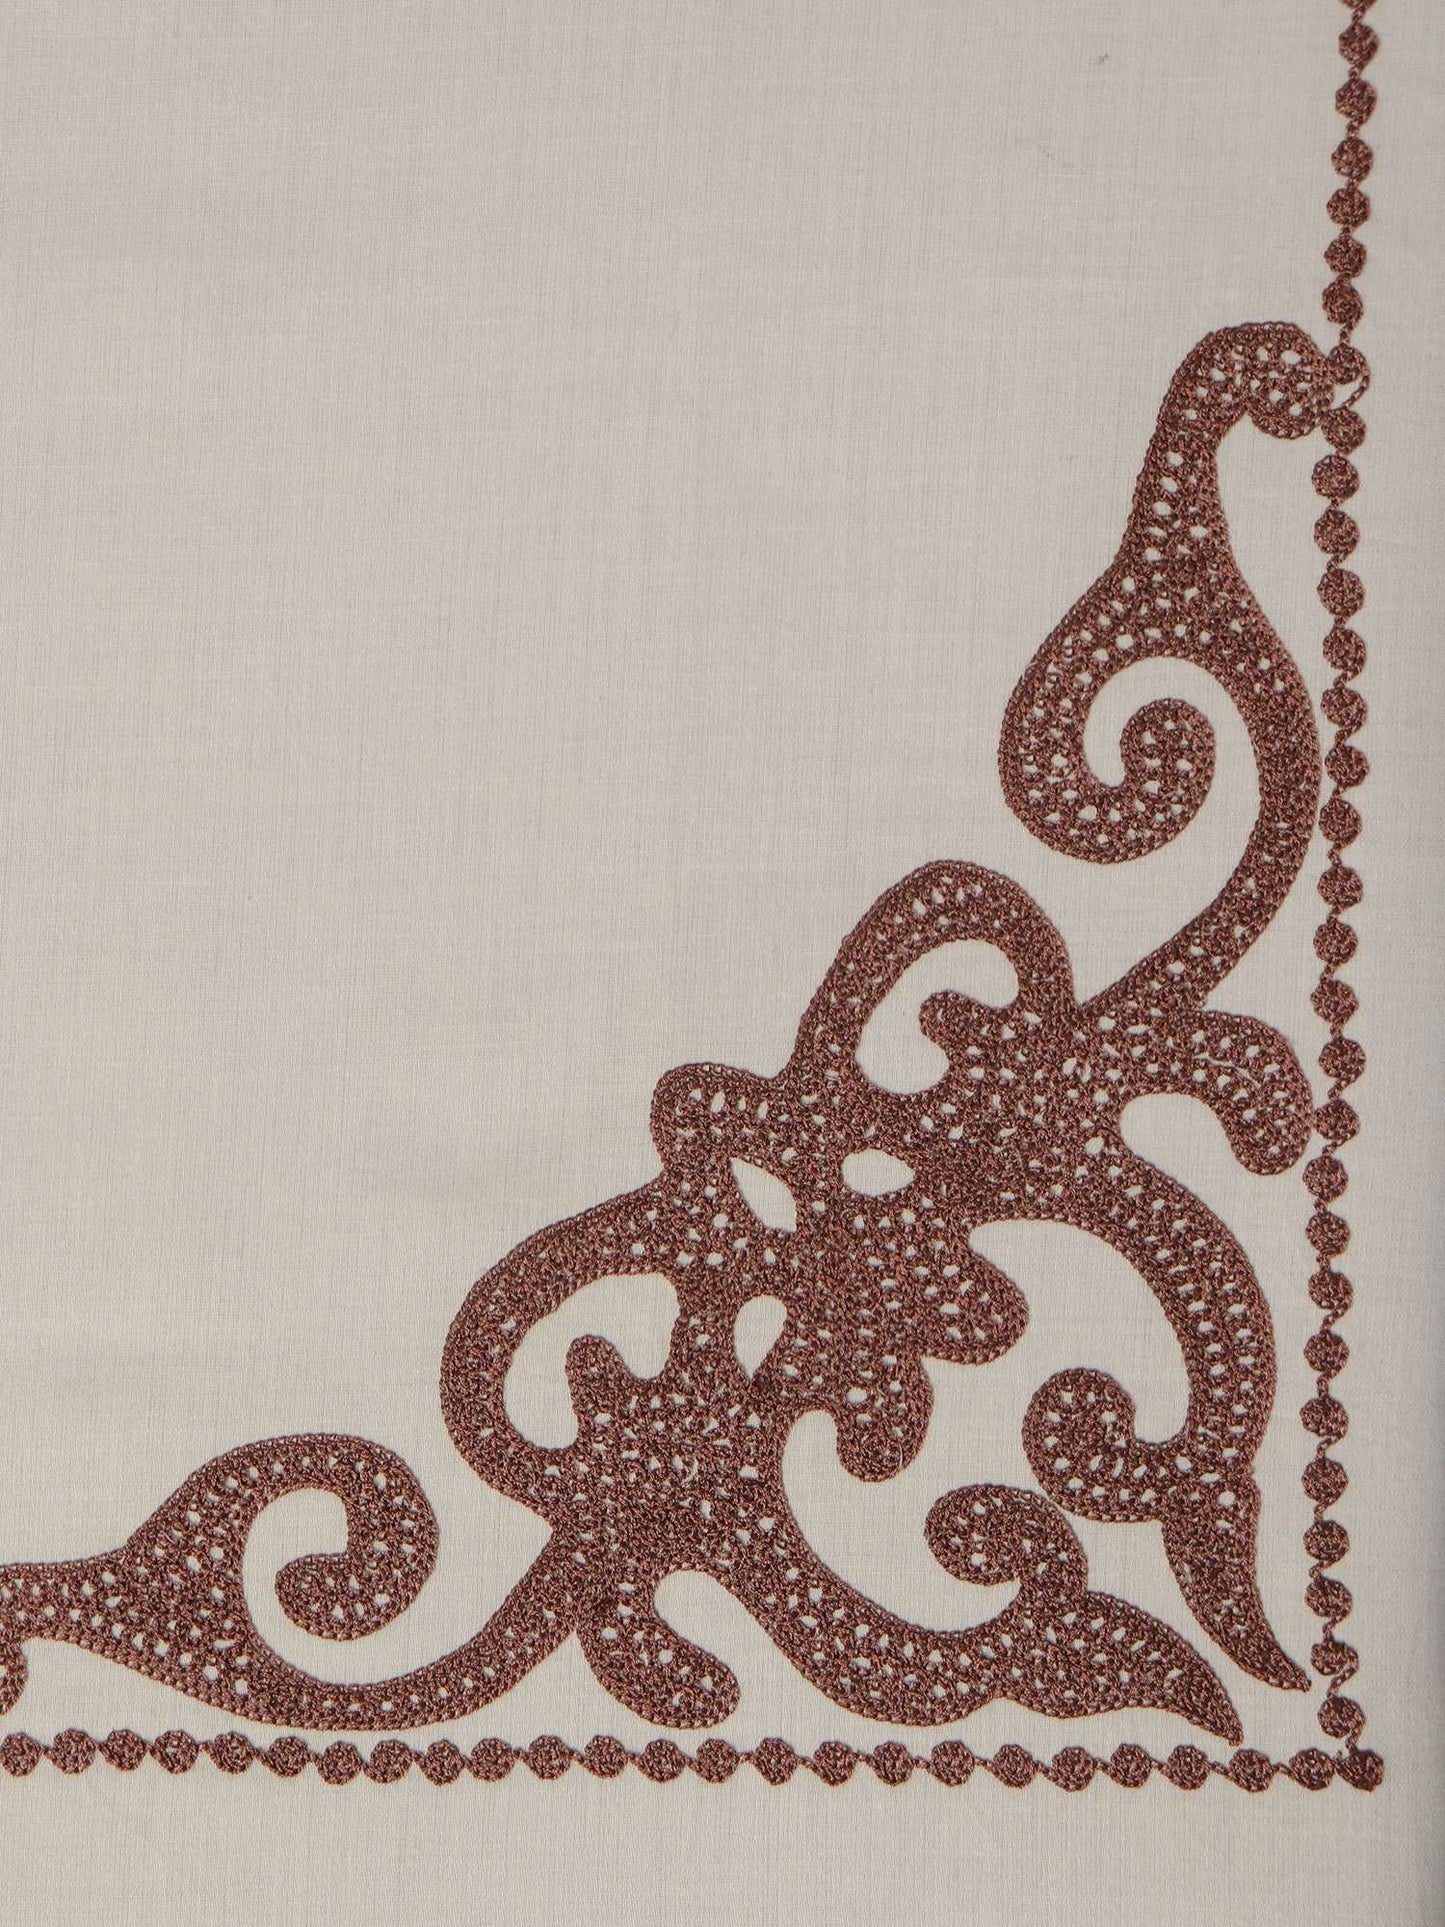 close up shot of embroidery on 400 thread count 100% cotton bedsheet